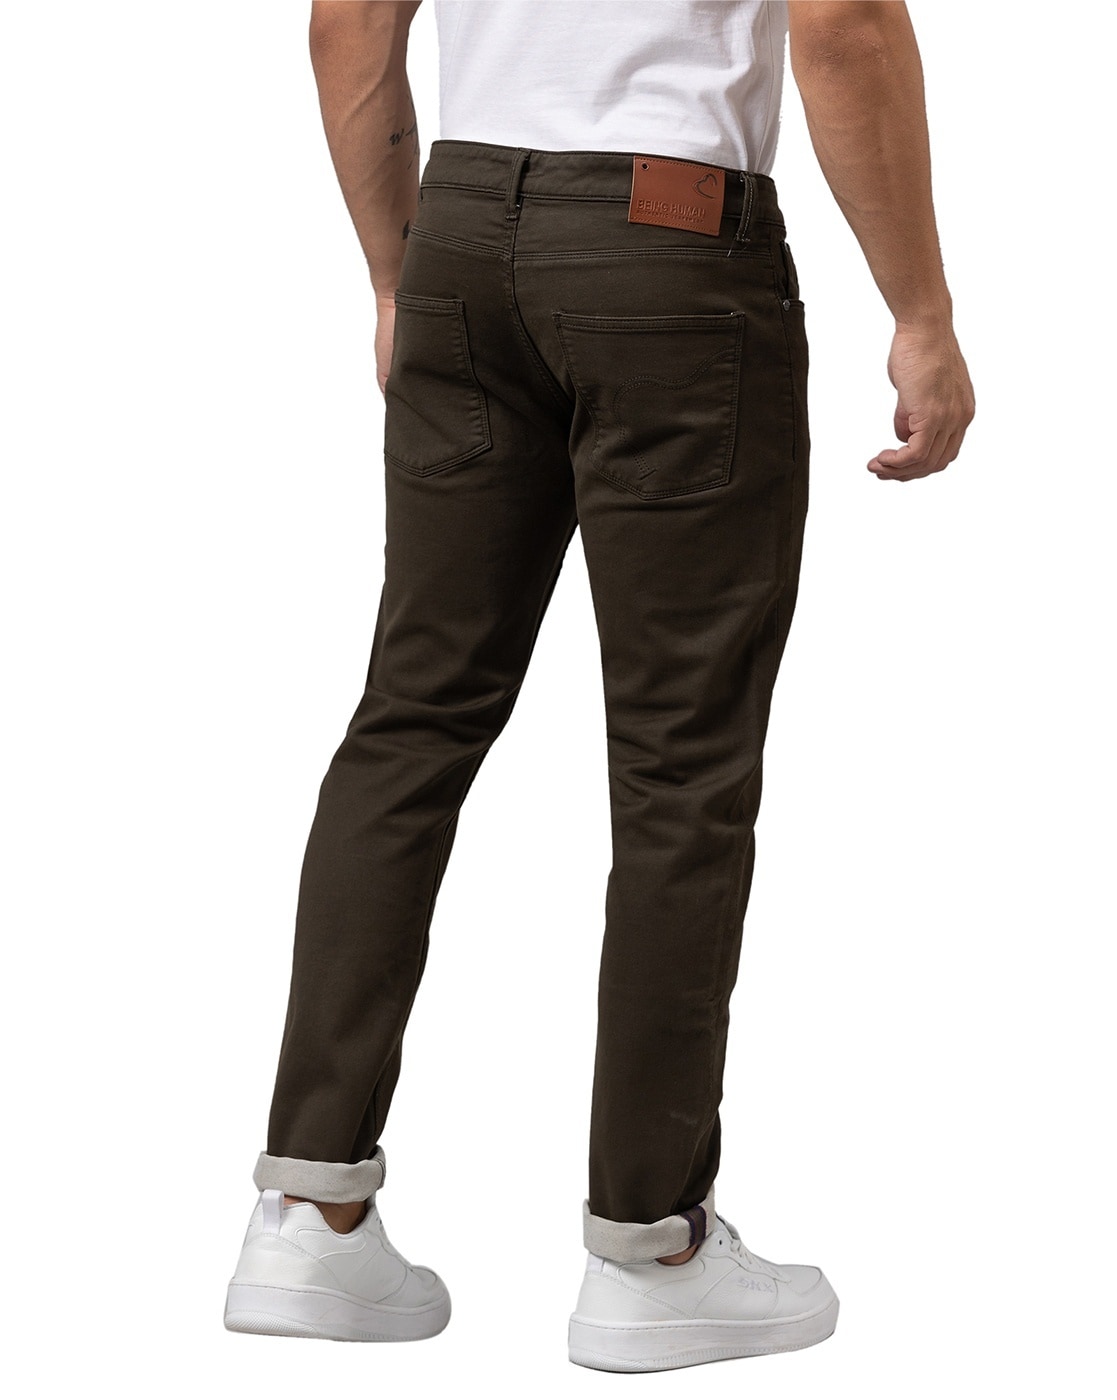 Jeans & Pants | Being Human Men's Jeans…..Waist 28 | Freeup